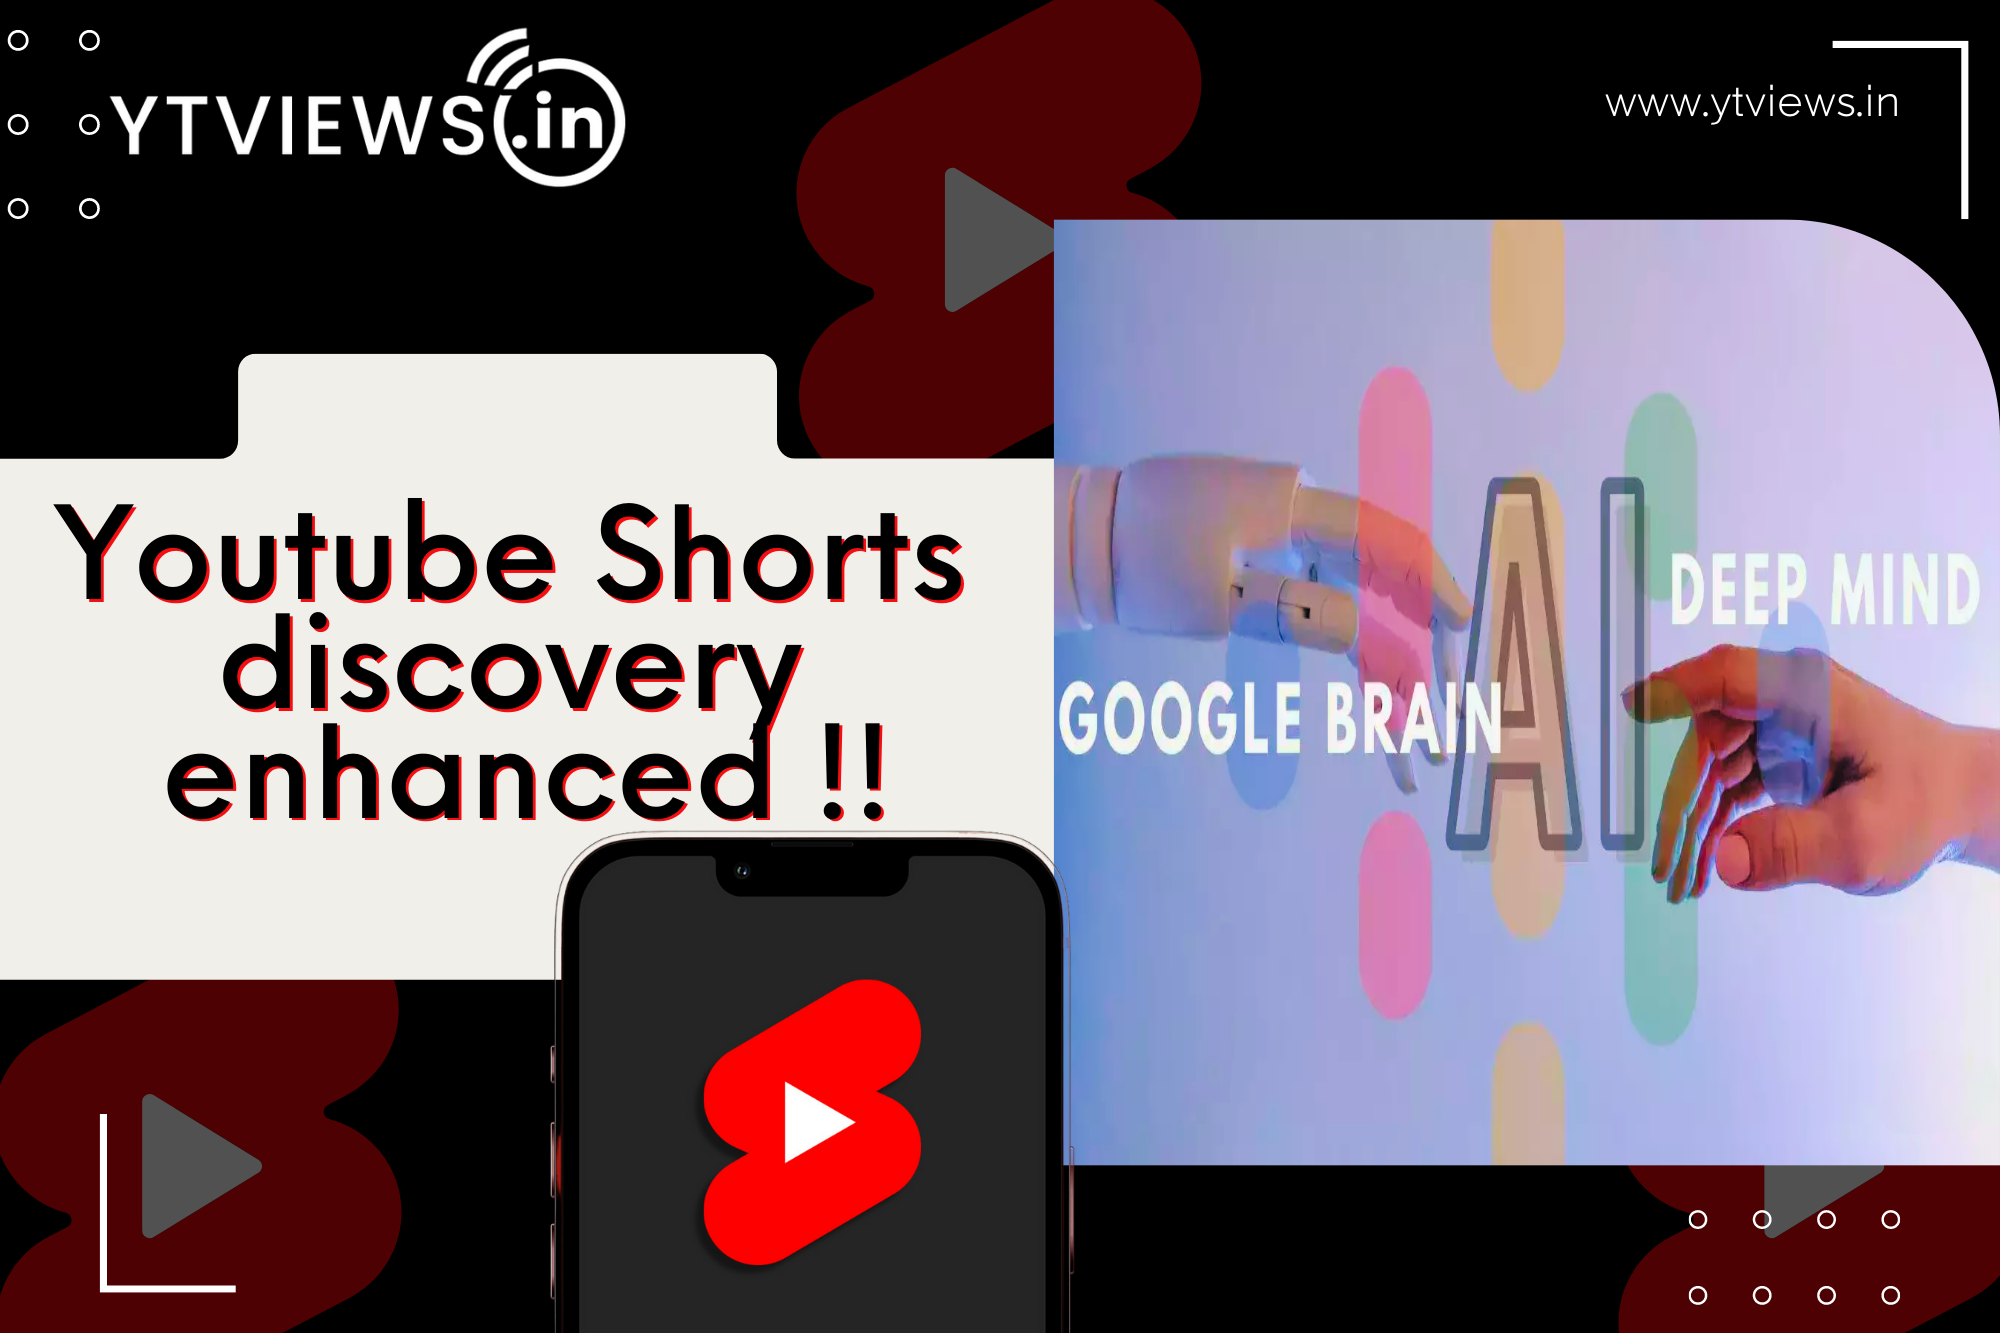 Google Brain joins hands with DeepMind to increase the discoverability of YouTube Shorts